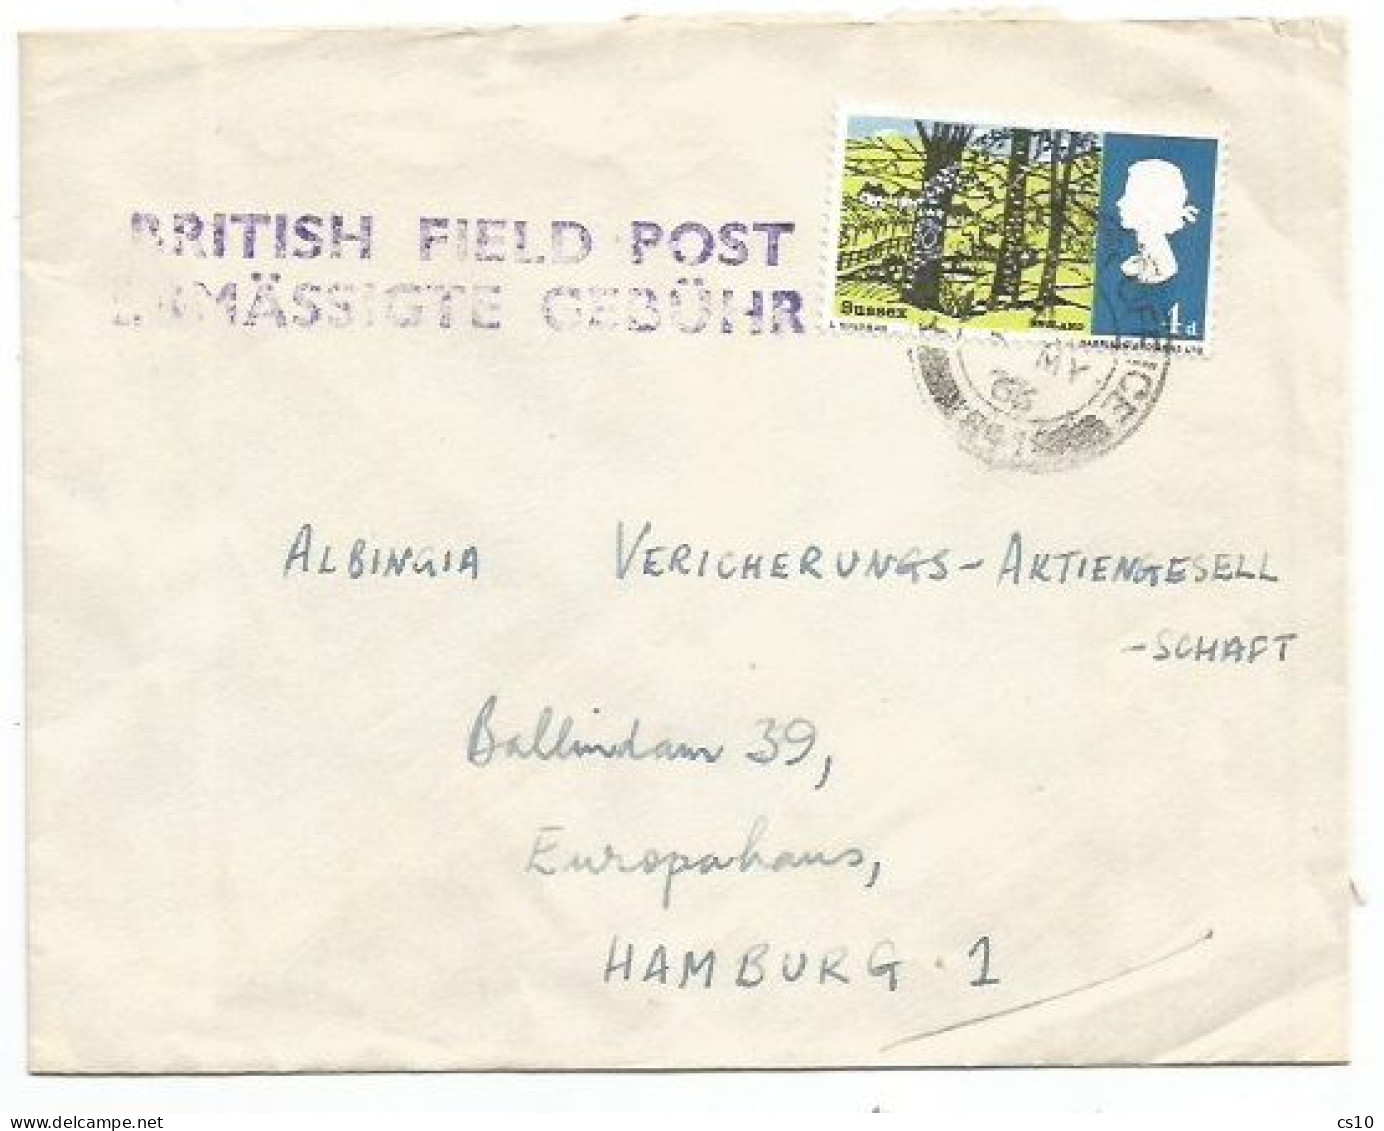 UK Britain FPO #891 Cover Germany To Hamburg With Sussex 4d Solo Franking - Covers & Documents